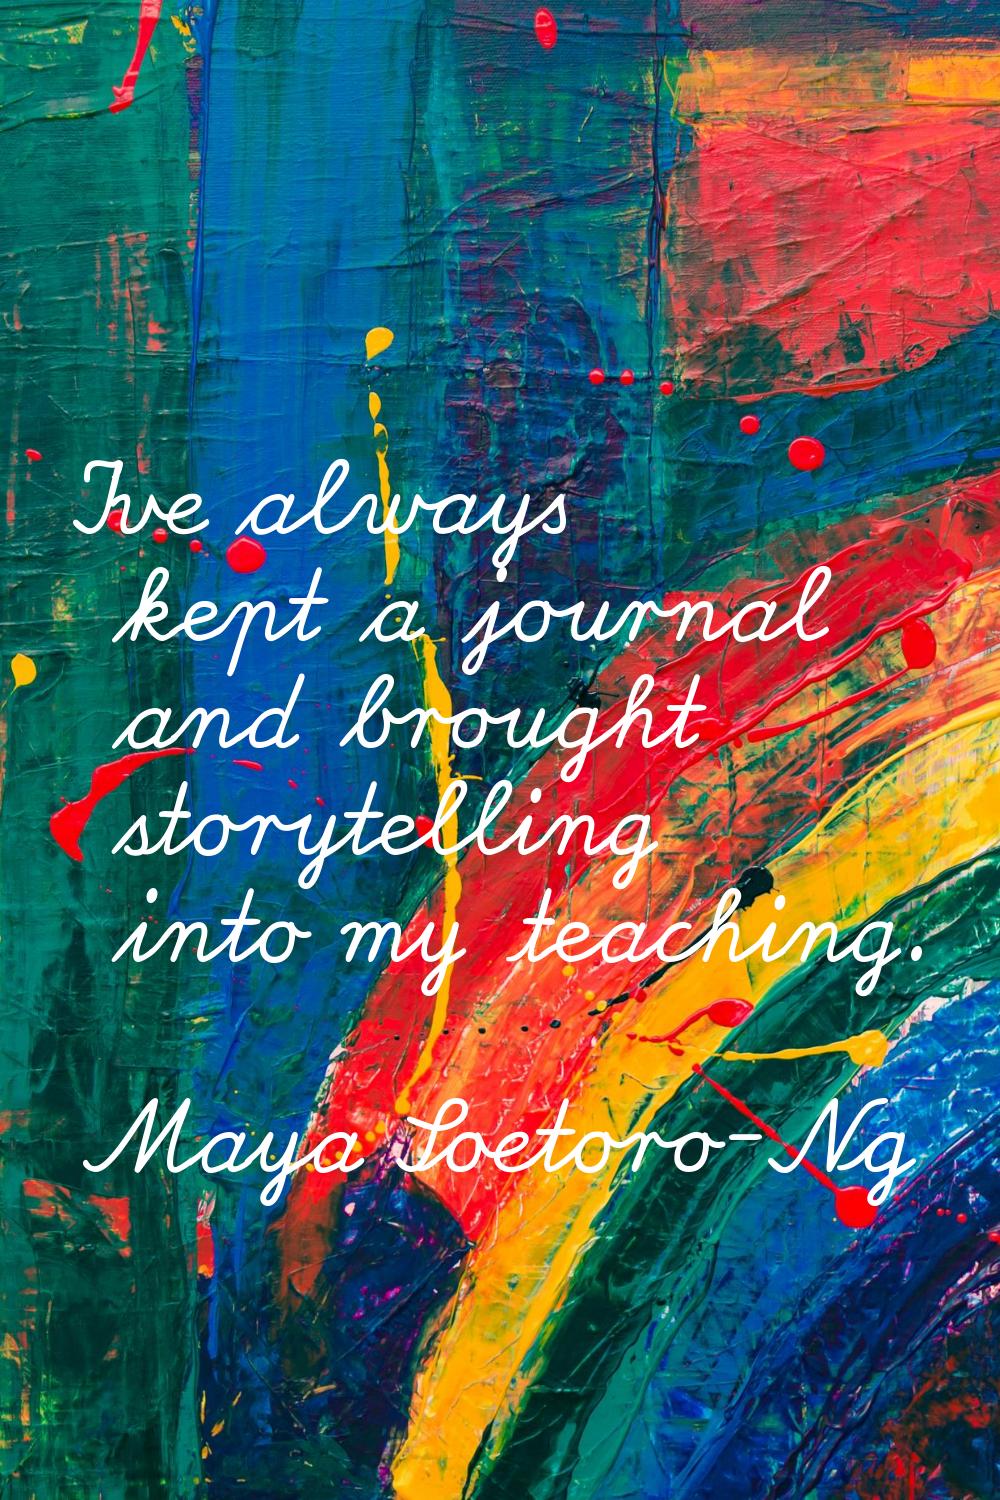 I've always kept a journal and brought storytelling into my teaching.